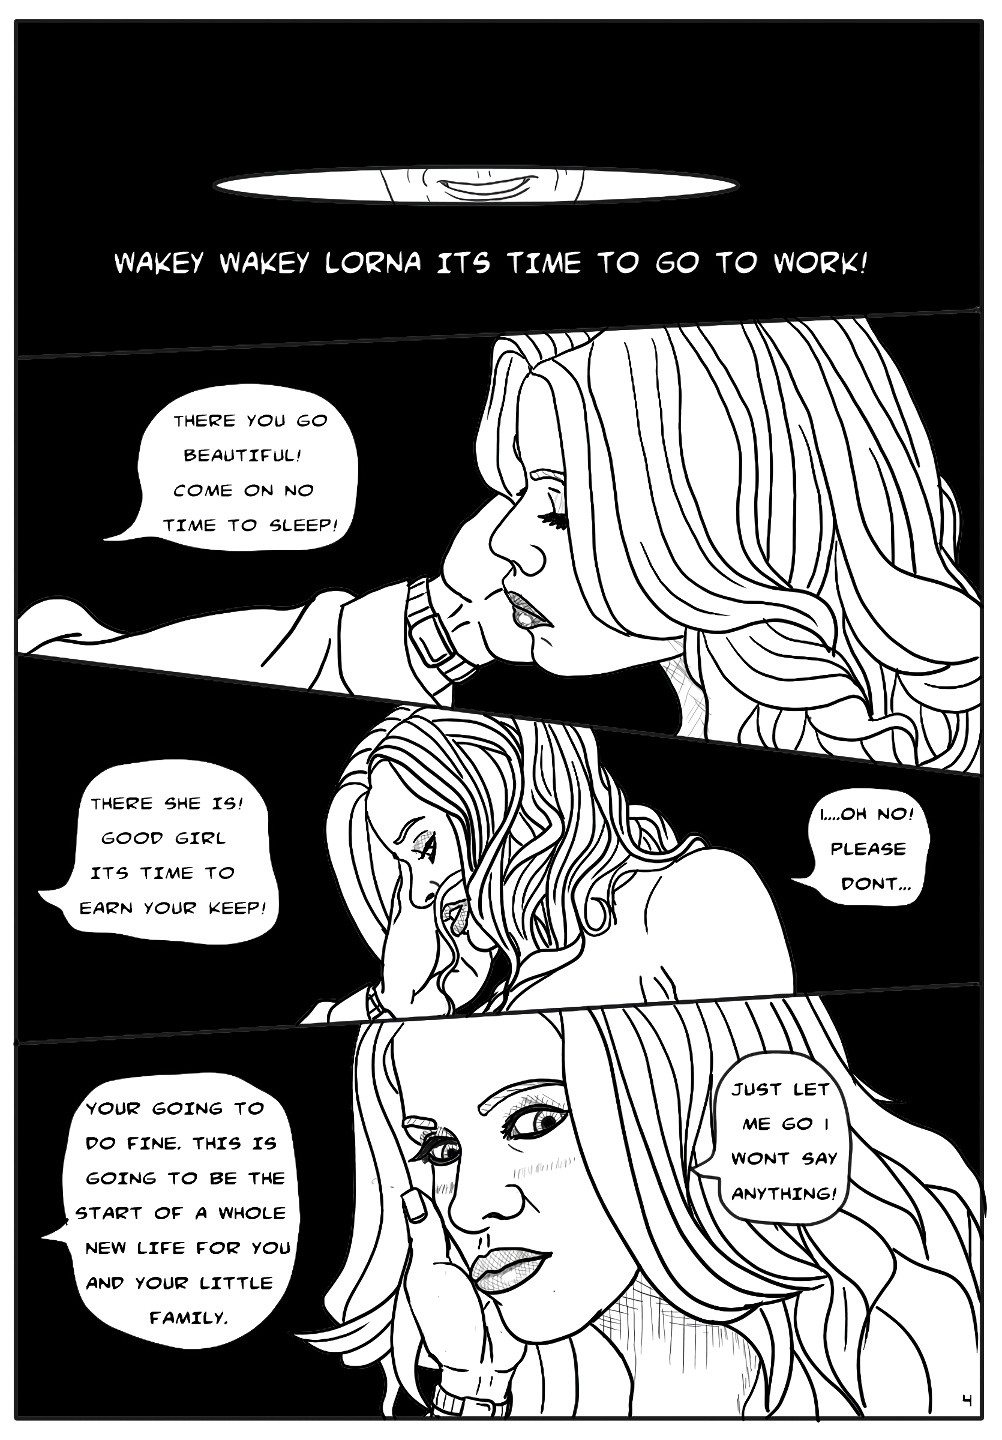 Unlucky Lorna the beginning porn comic picture 4